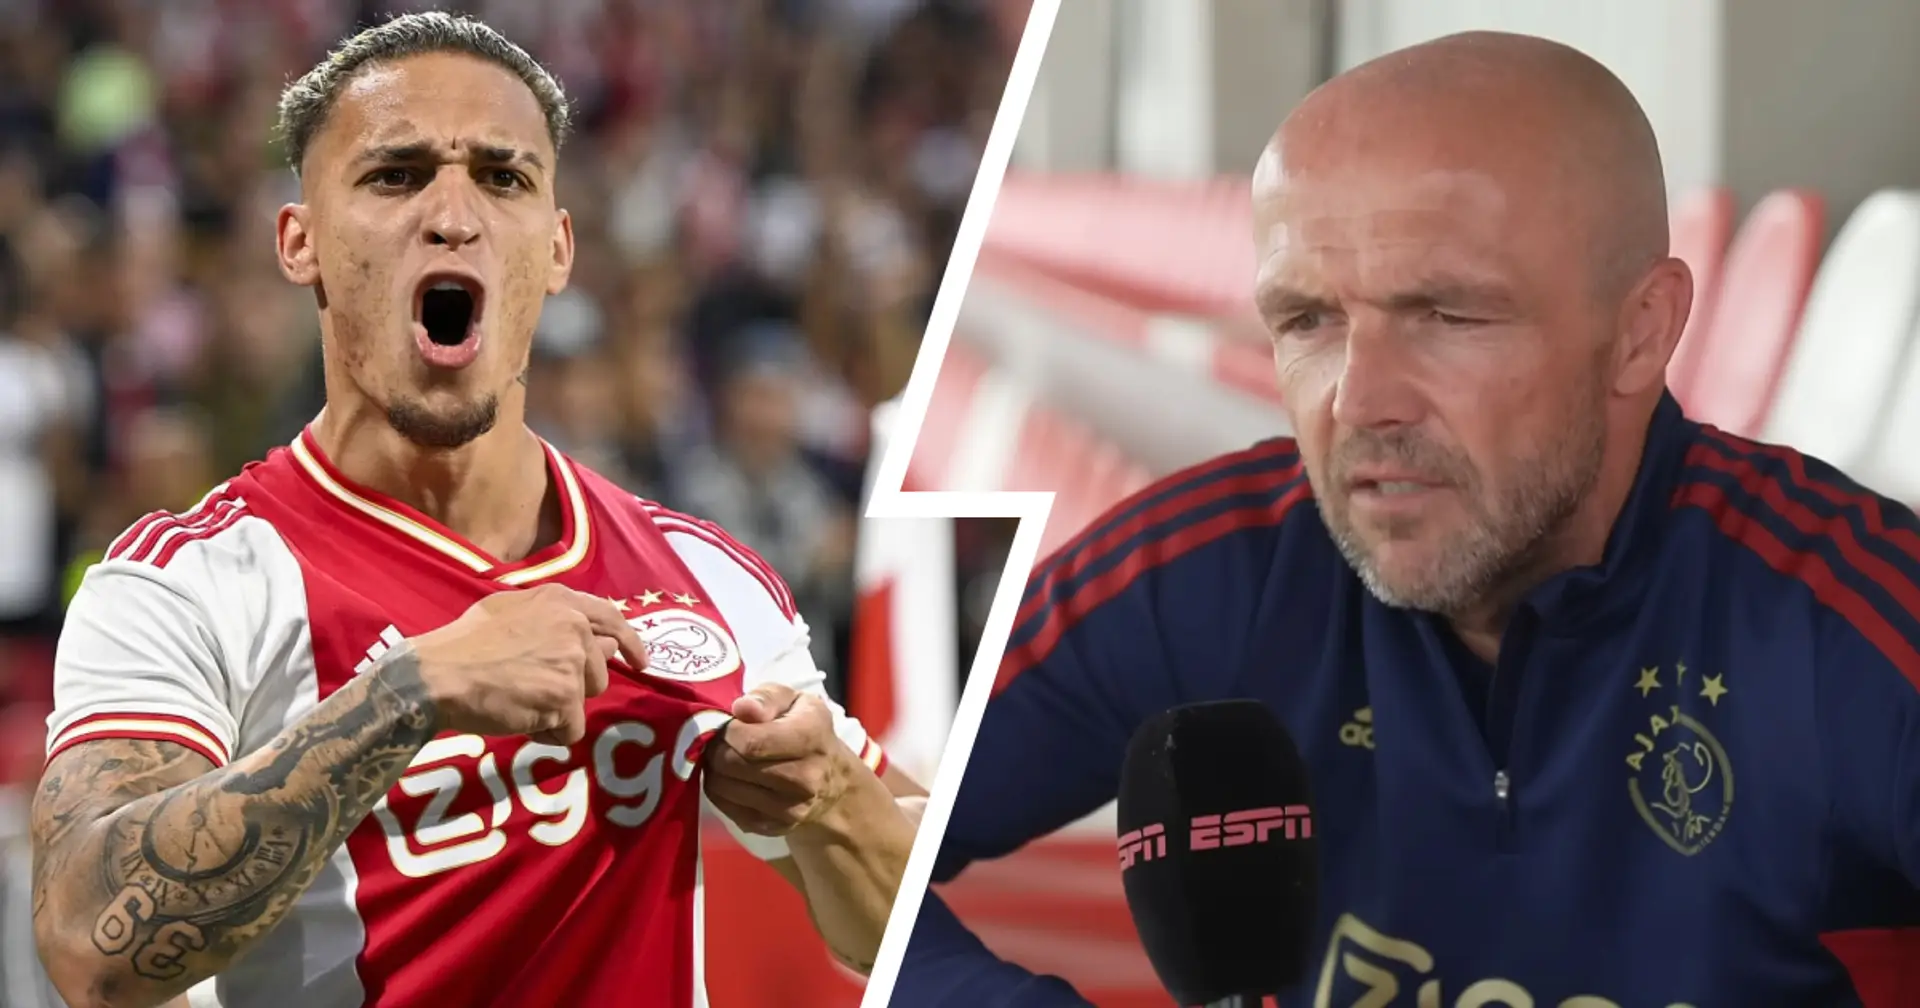 'At some point you're a professional': Ajax boss suggests Antony could be fined for missing training